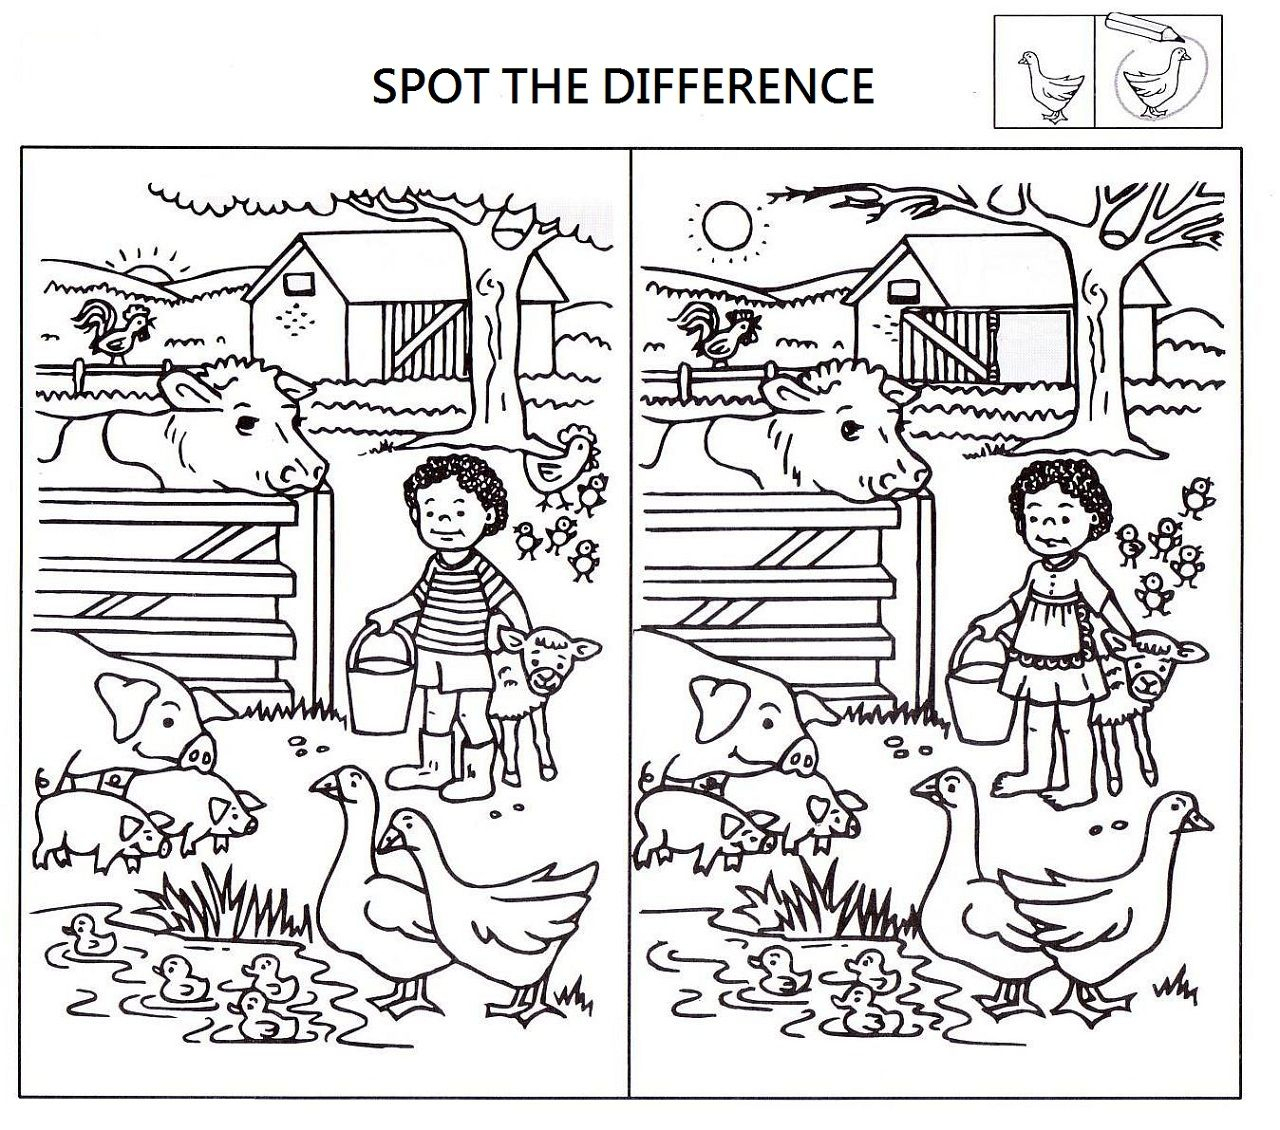 Spot The Difference Worksheets For Kids | Kids Worksheets Printable - Free Printable Spot The Difference Worksheets